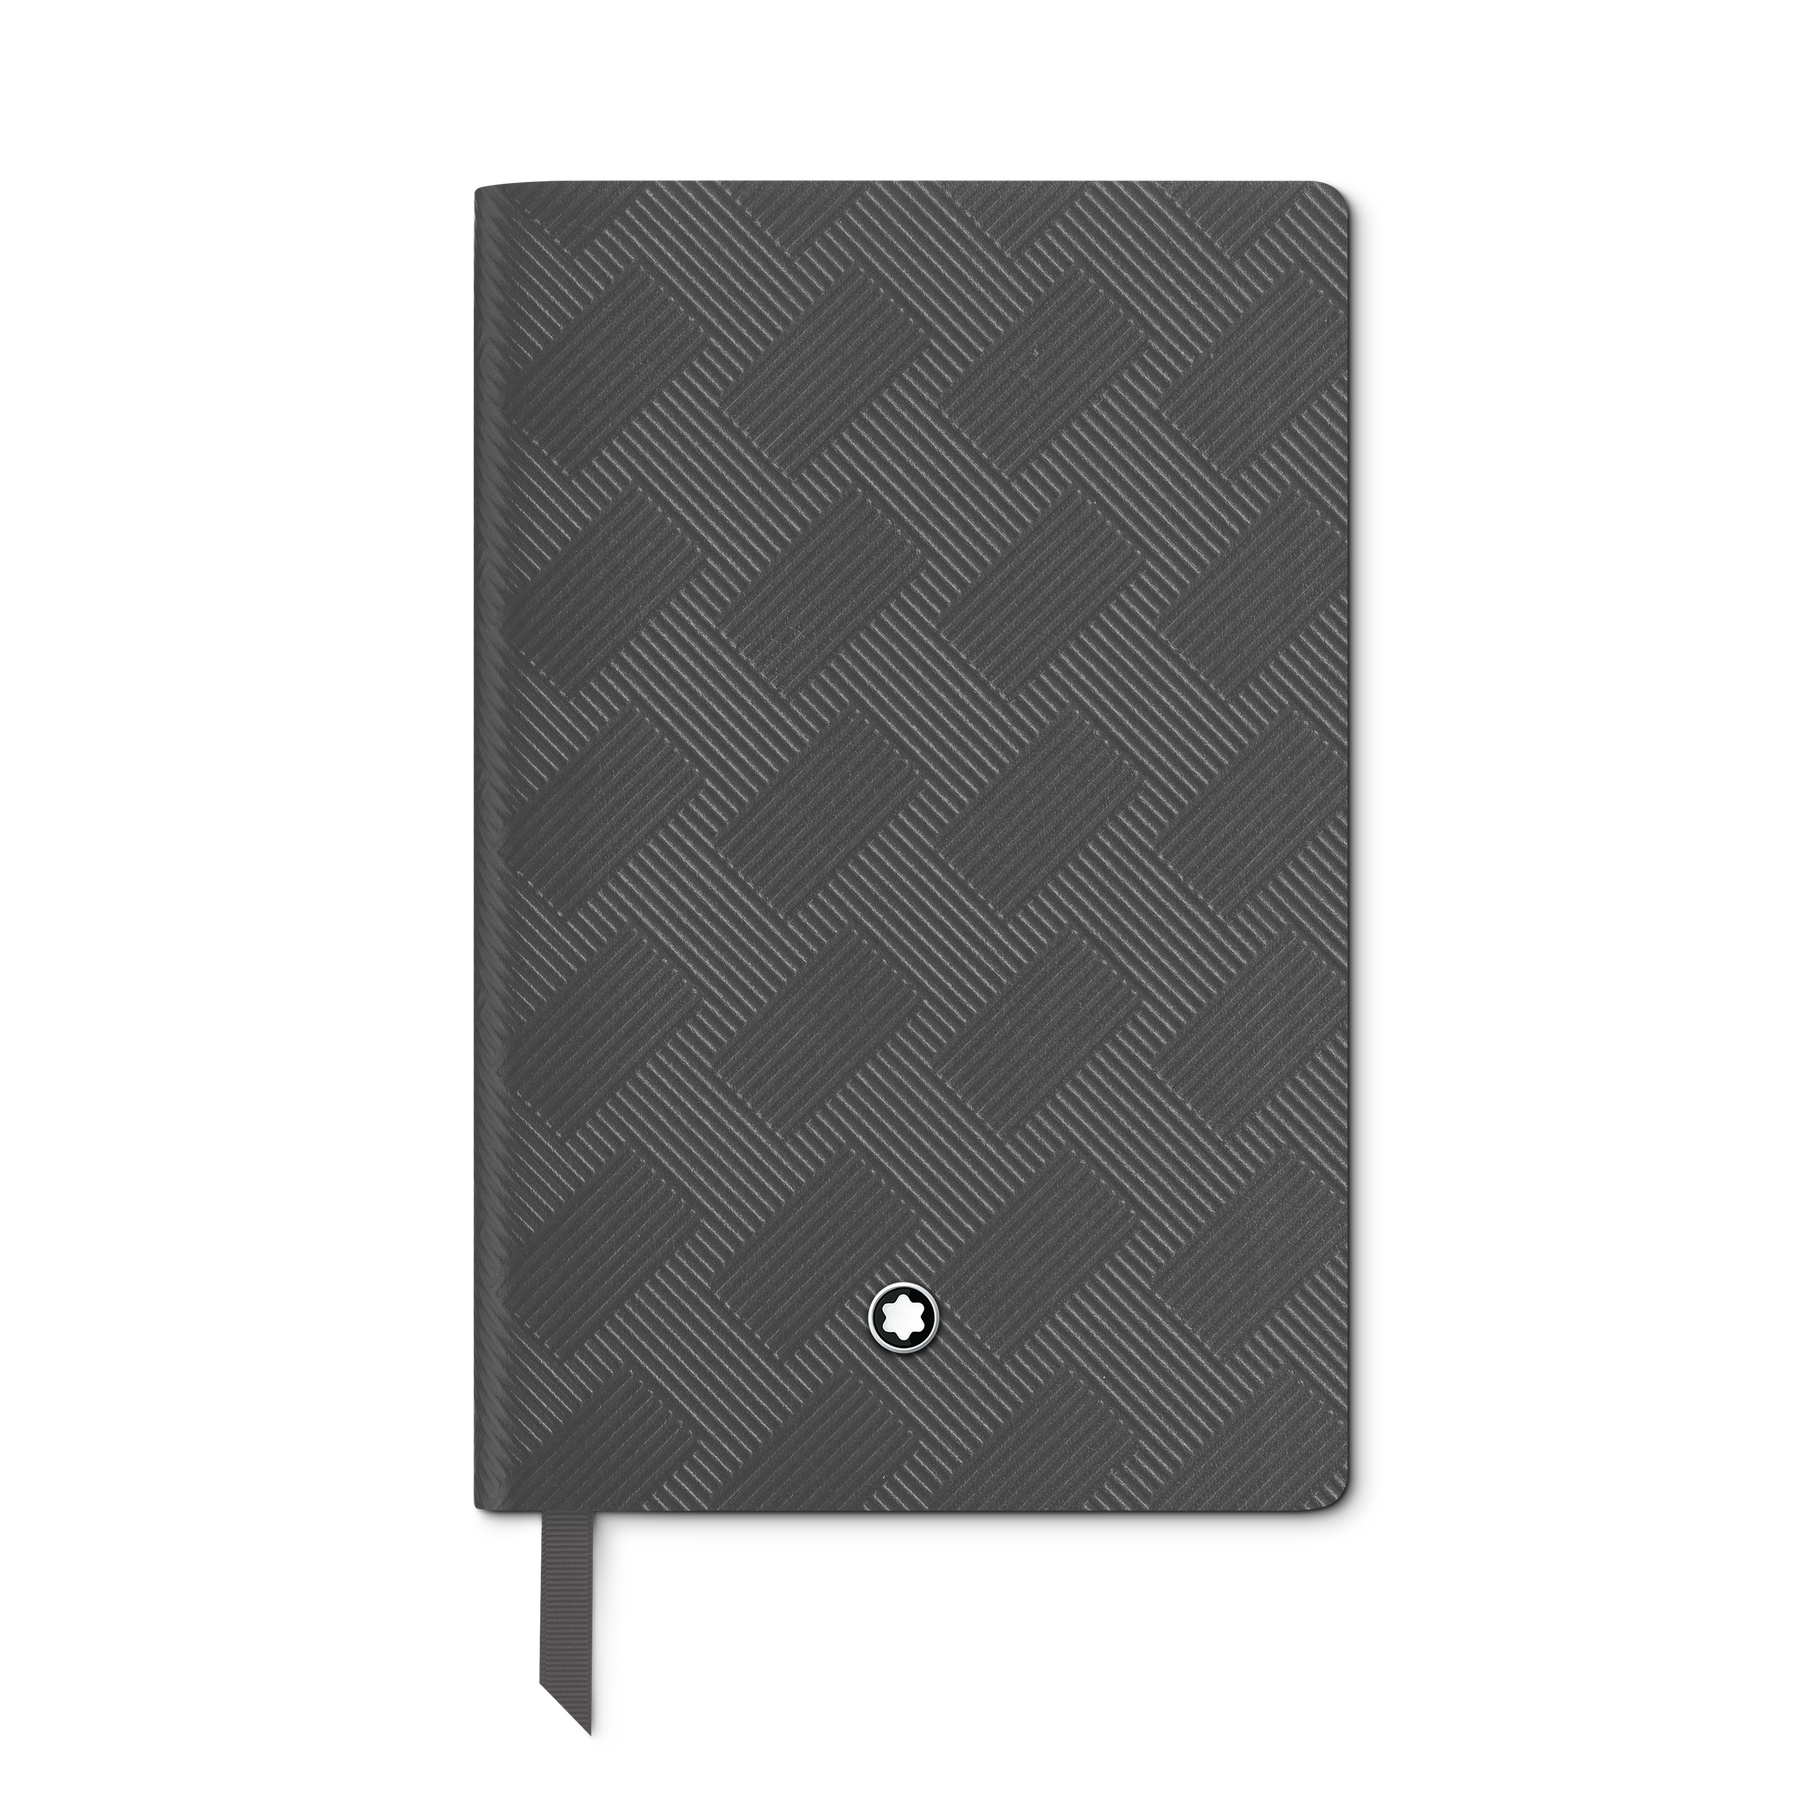 Pocket Notebook #148, Montblanc Extreme 3.0 Collection, gray lined